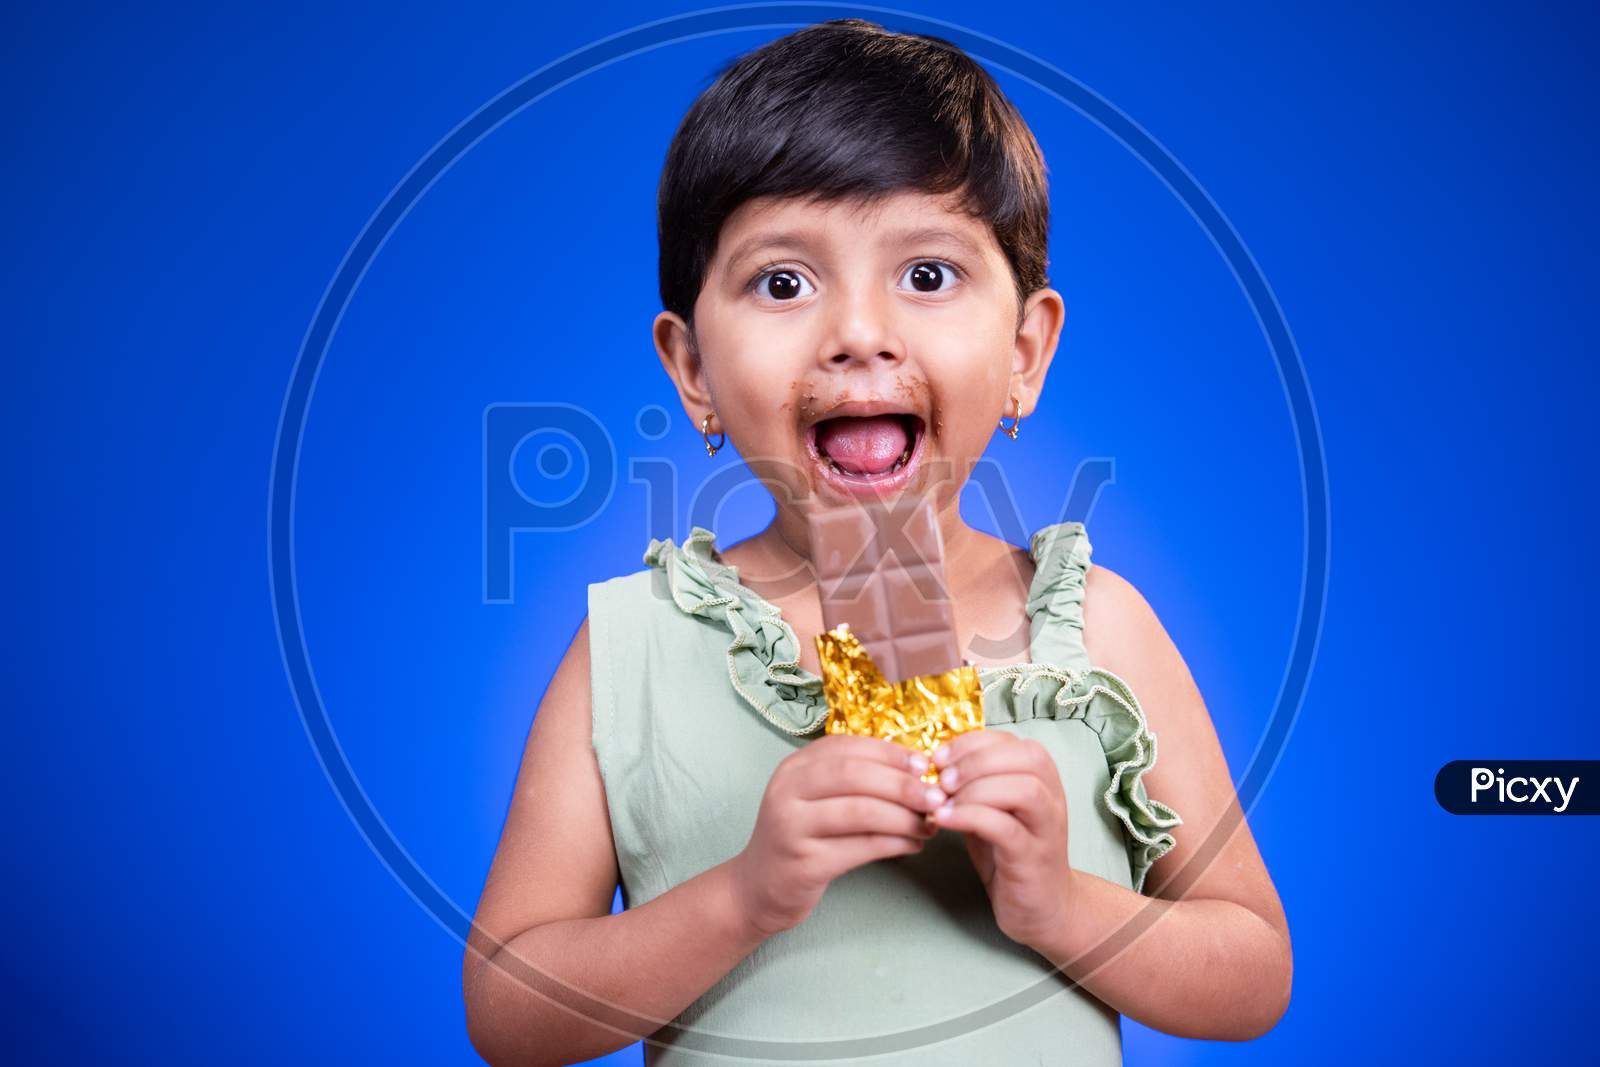 Excited Girl Kid With Large Eyes Open, Enjoying Eating Chocolate On Blue Studio Background - Concept Of Unhealthy Food Consumption And Childrens Love On Chocolate